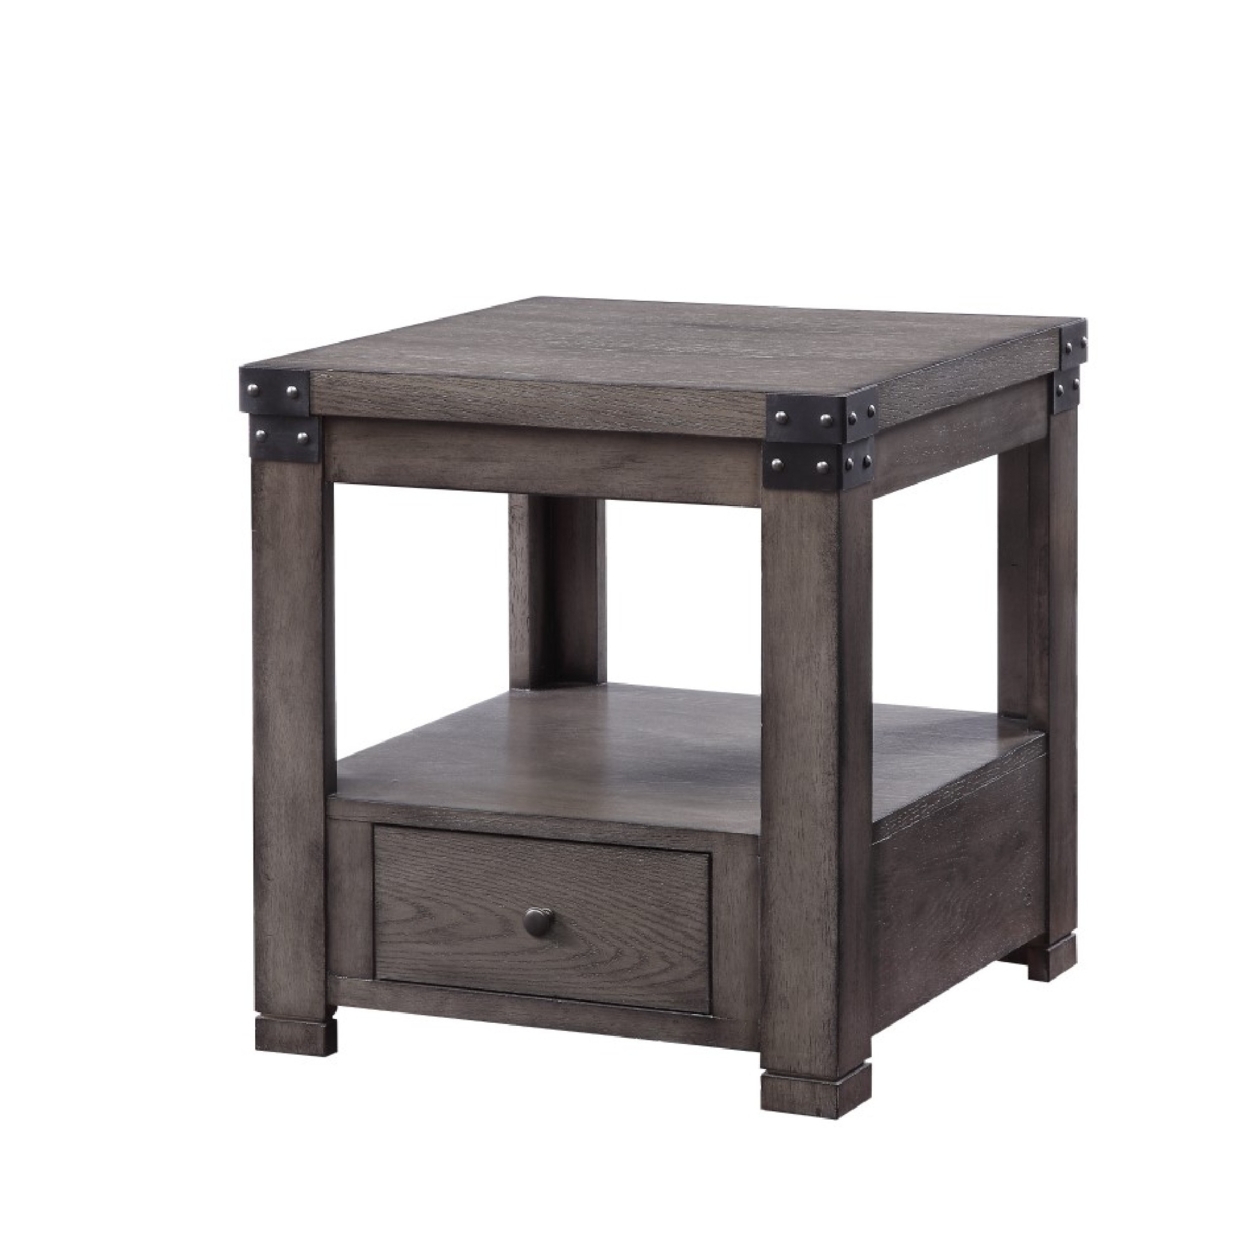 Wooden End Table With Open Bottom Shelf And One Drawer, Gray- Saltoro Sherpi